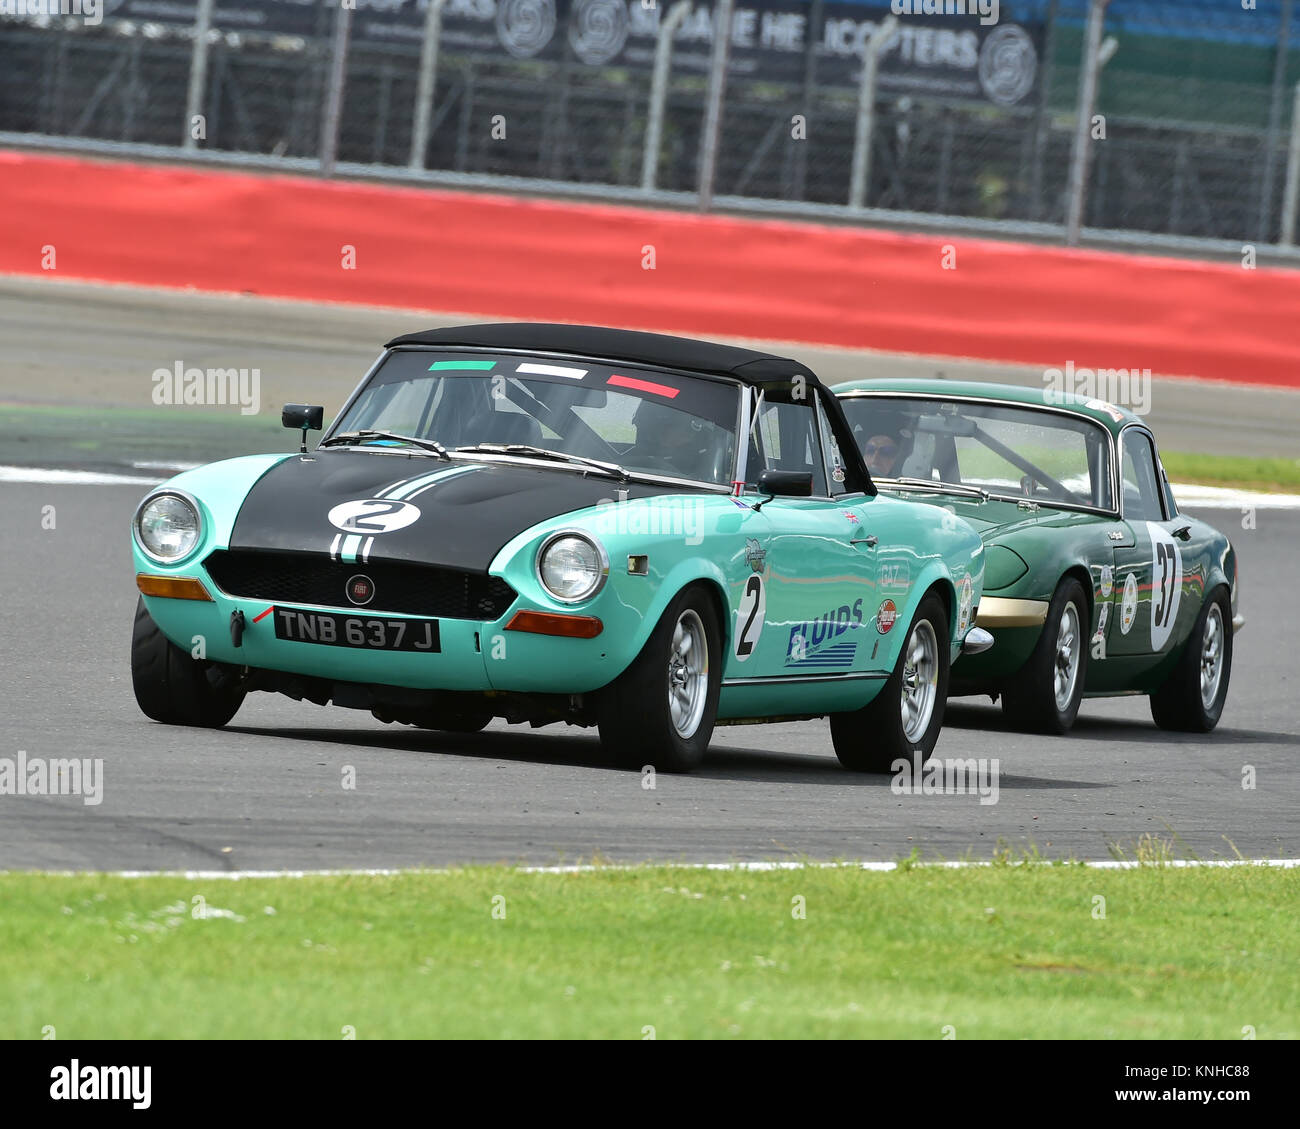 Ian Jacobs, FIAT 124 Spider, Historic Road Sports, HSCC, Silverstone International Trophy, Silverstone Historic Festival Meeting, 20th May 2017, Chris Stock Photo